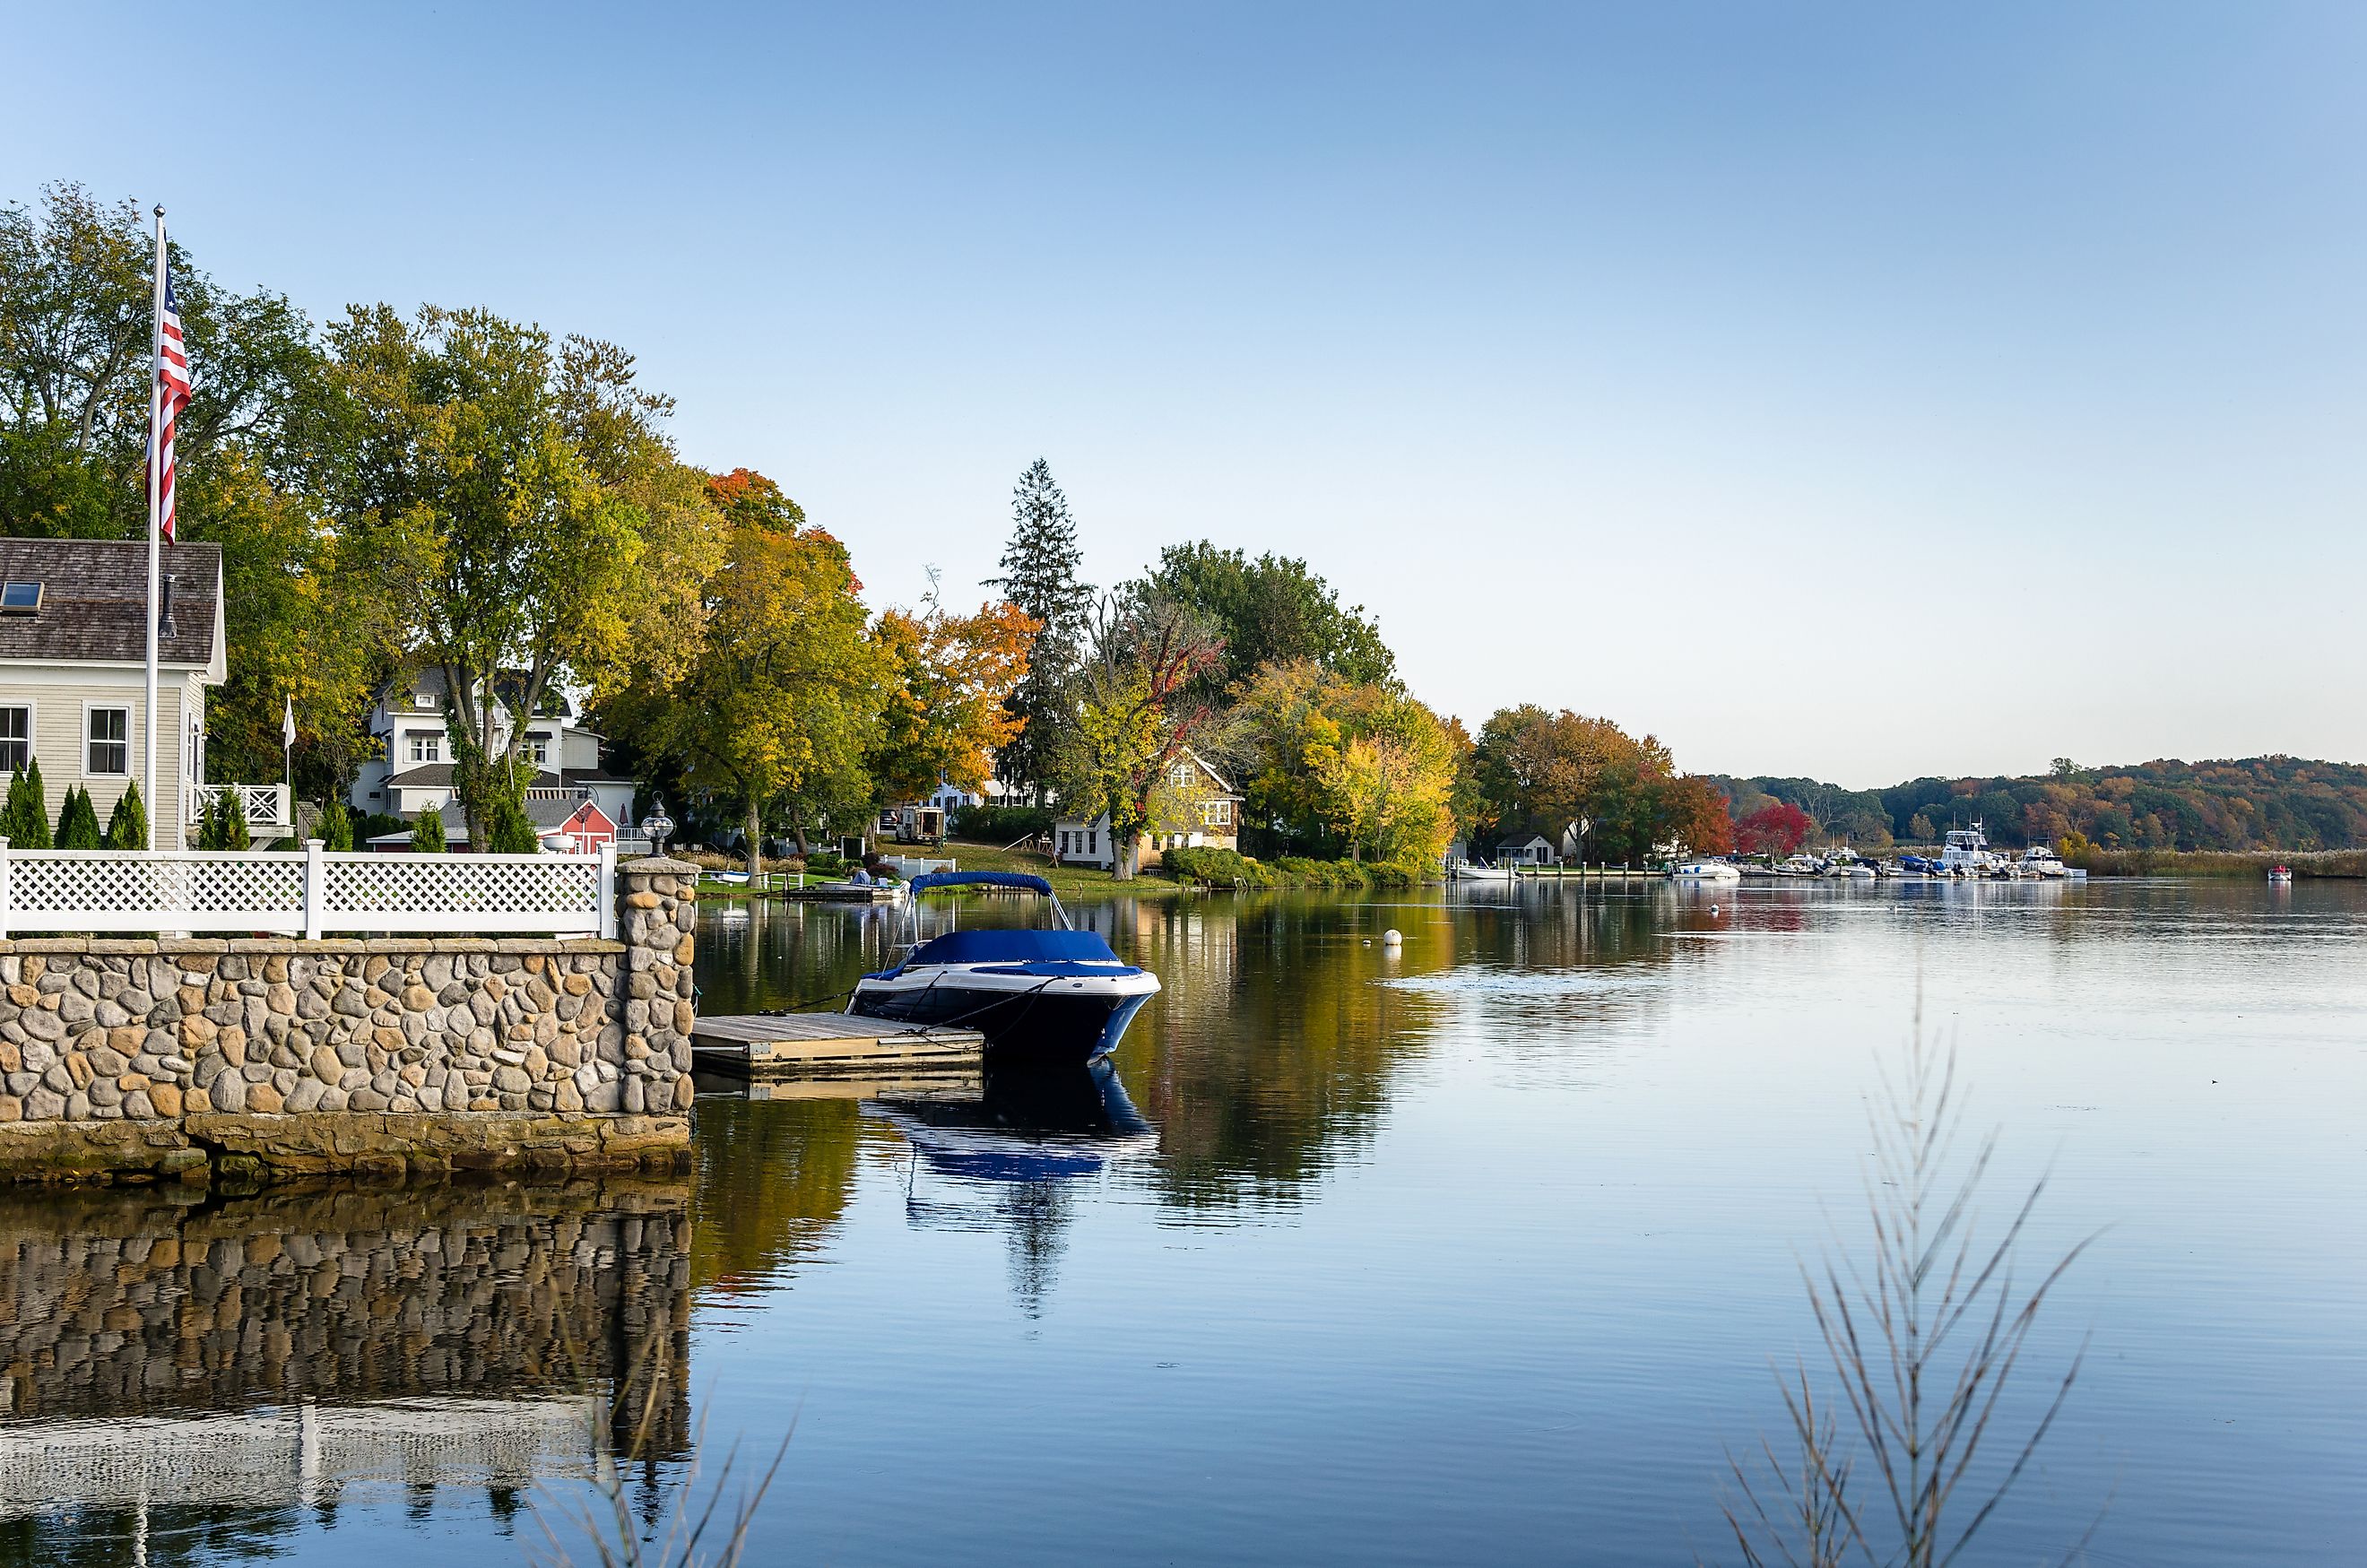 Waterside Houses among Trees with Boats Moored to Wooden Jetties on a Clear Autumn Day